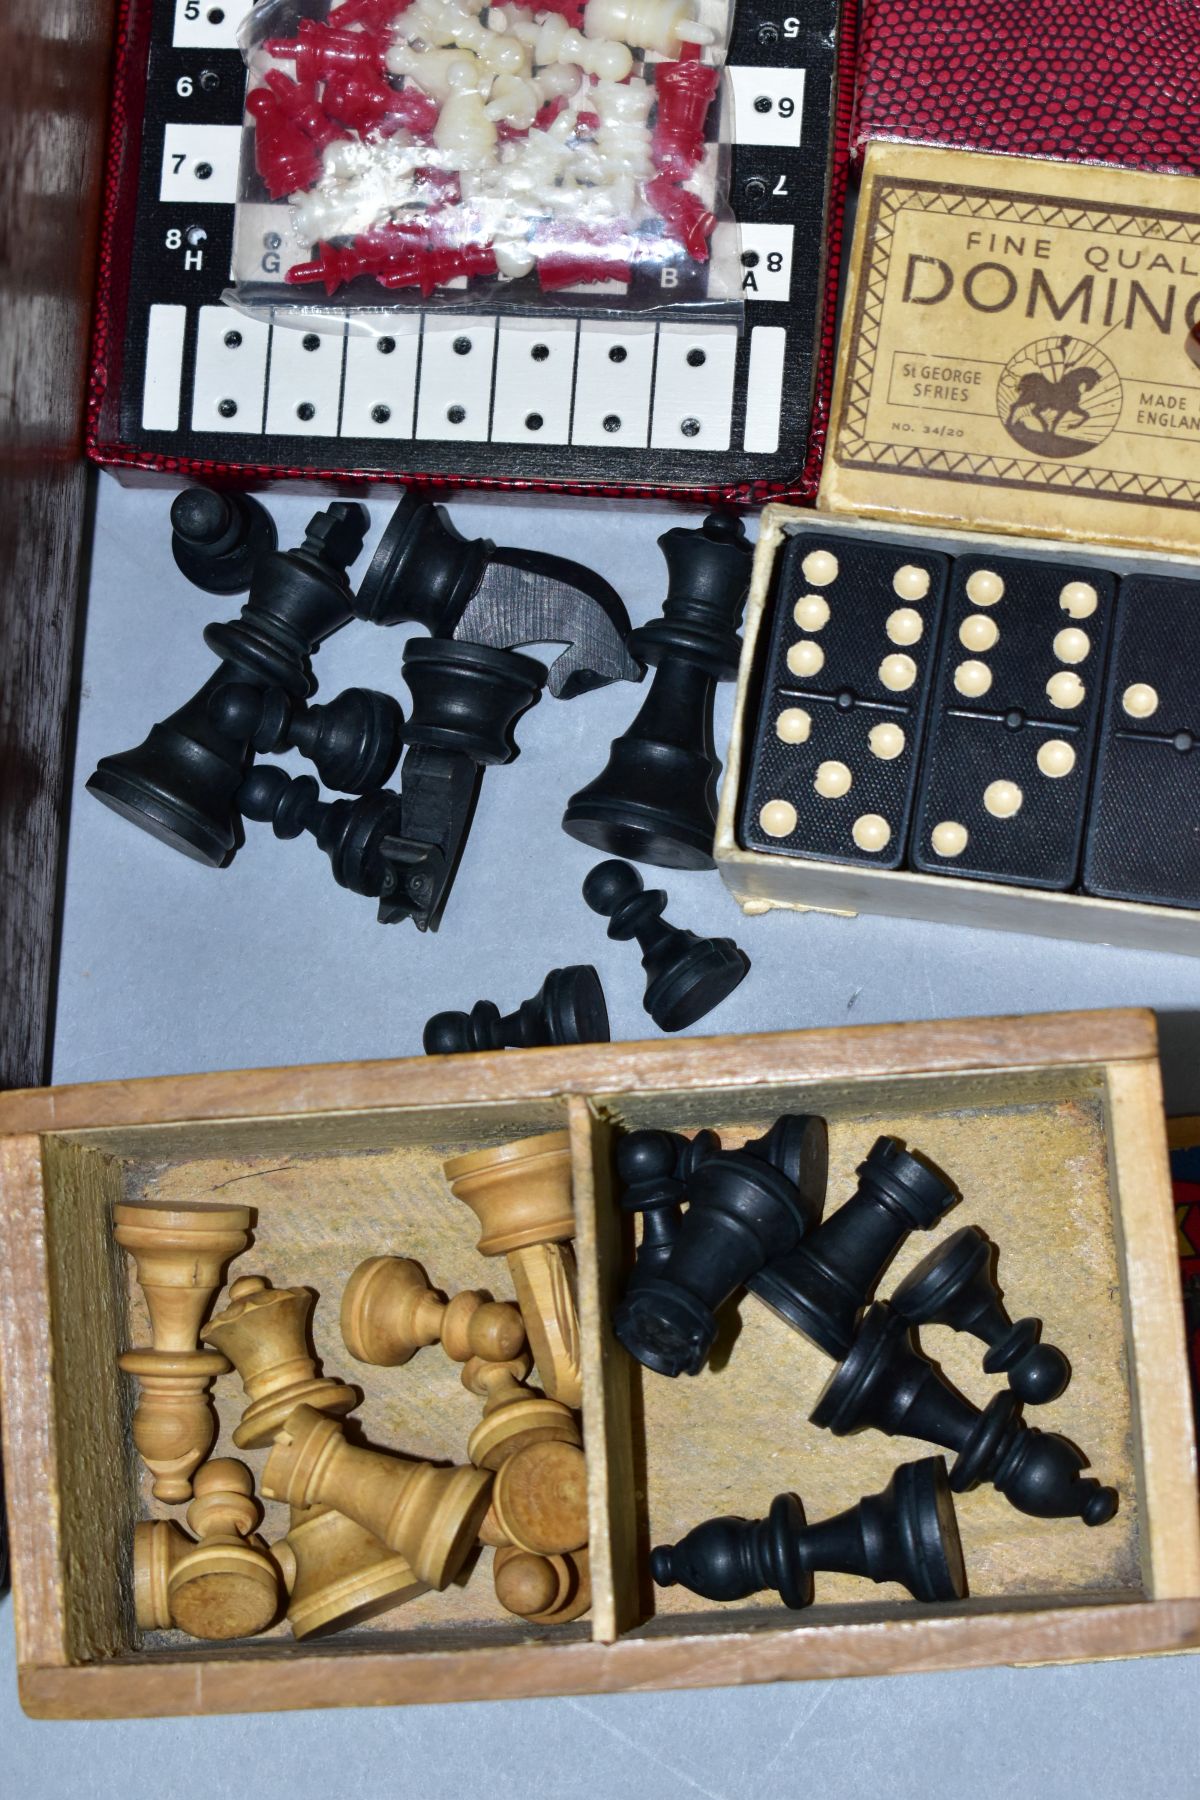 A WOODEN BOX CONTAINING A BOXED SET OF TSL BOXWOOD CHESSMEN, a boxed set of Crystalate dominoes, - Image 2 of 5